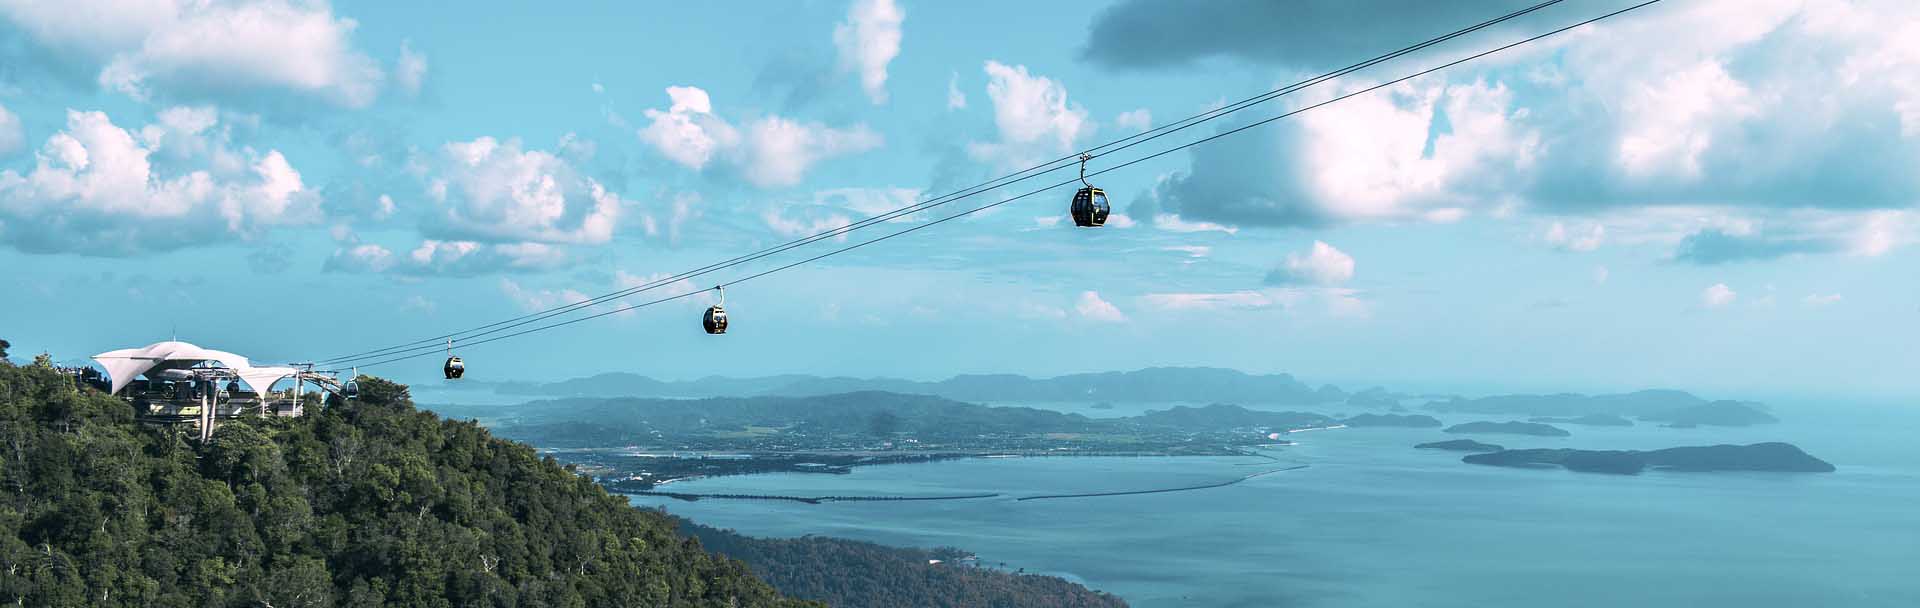 Langkawi Cable Car Discovery